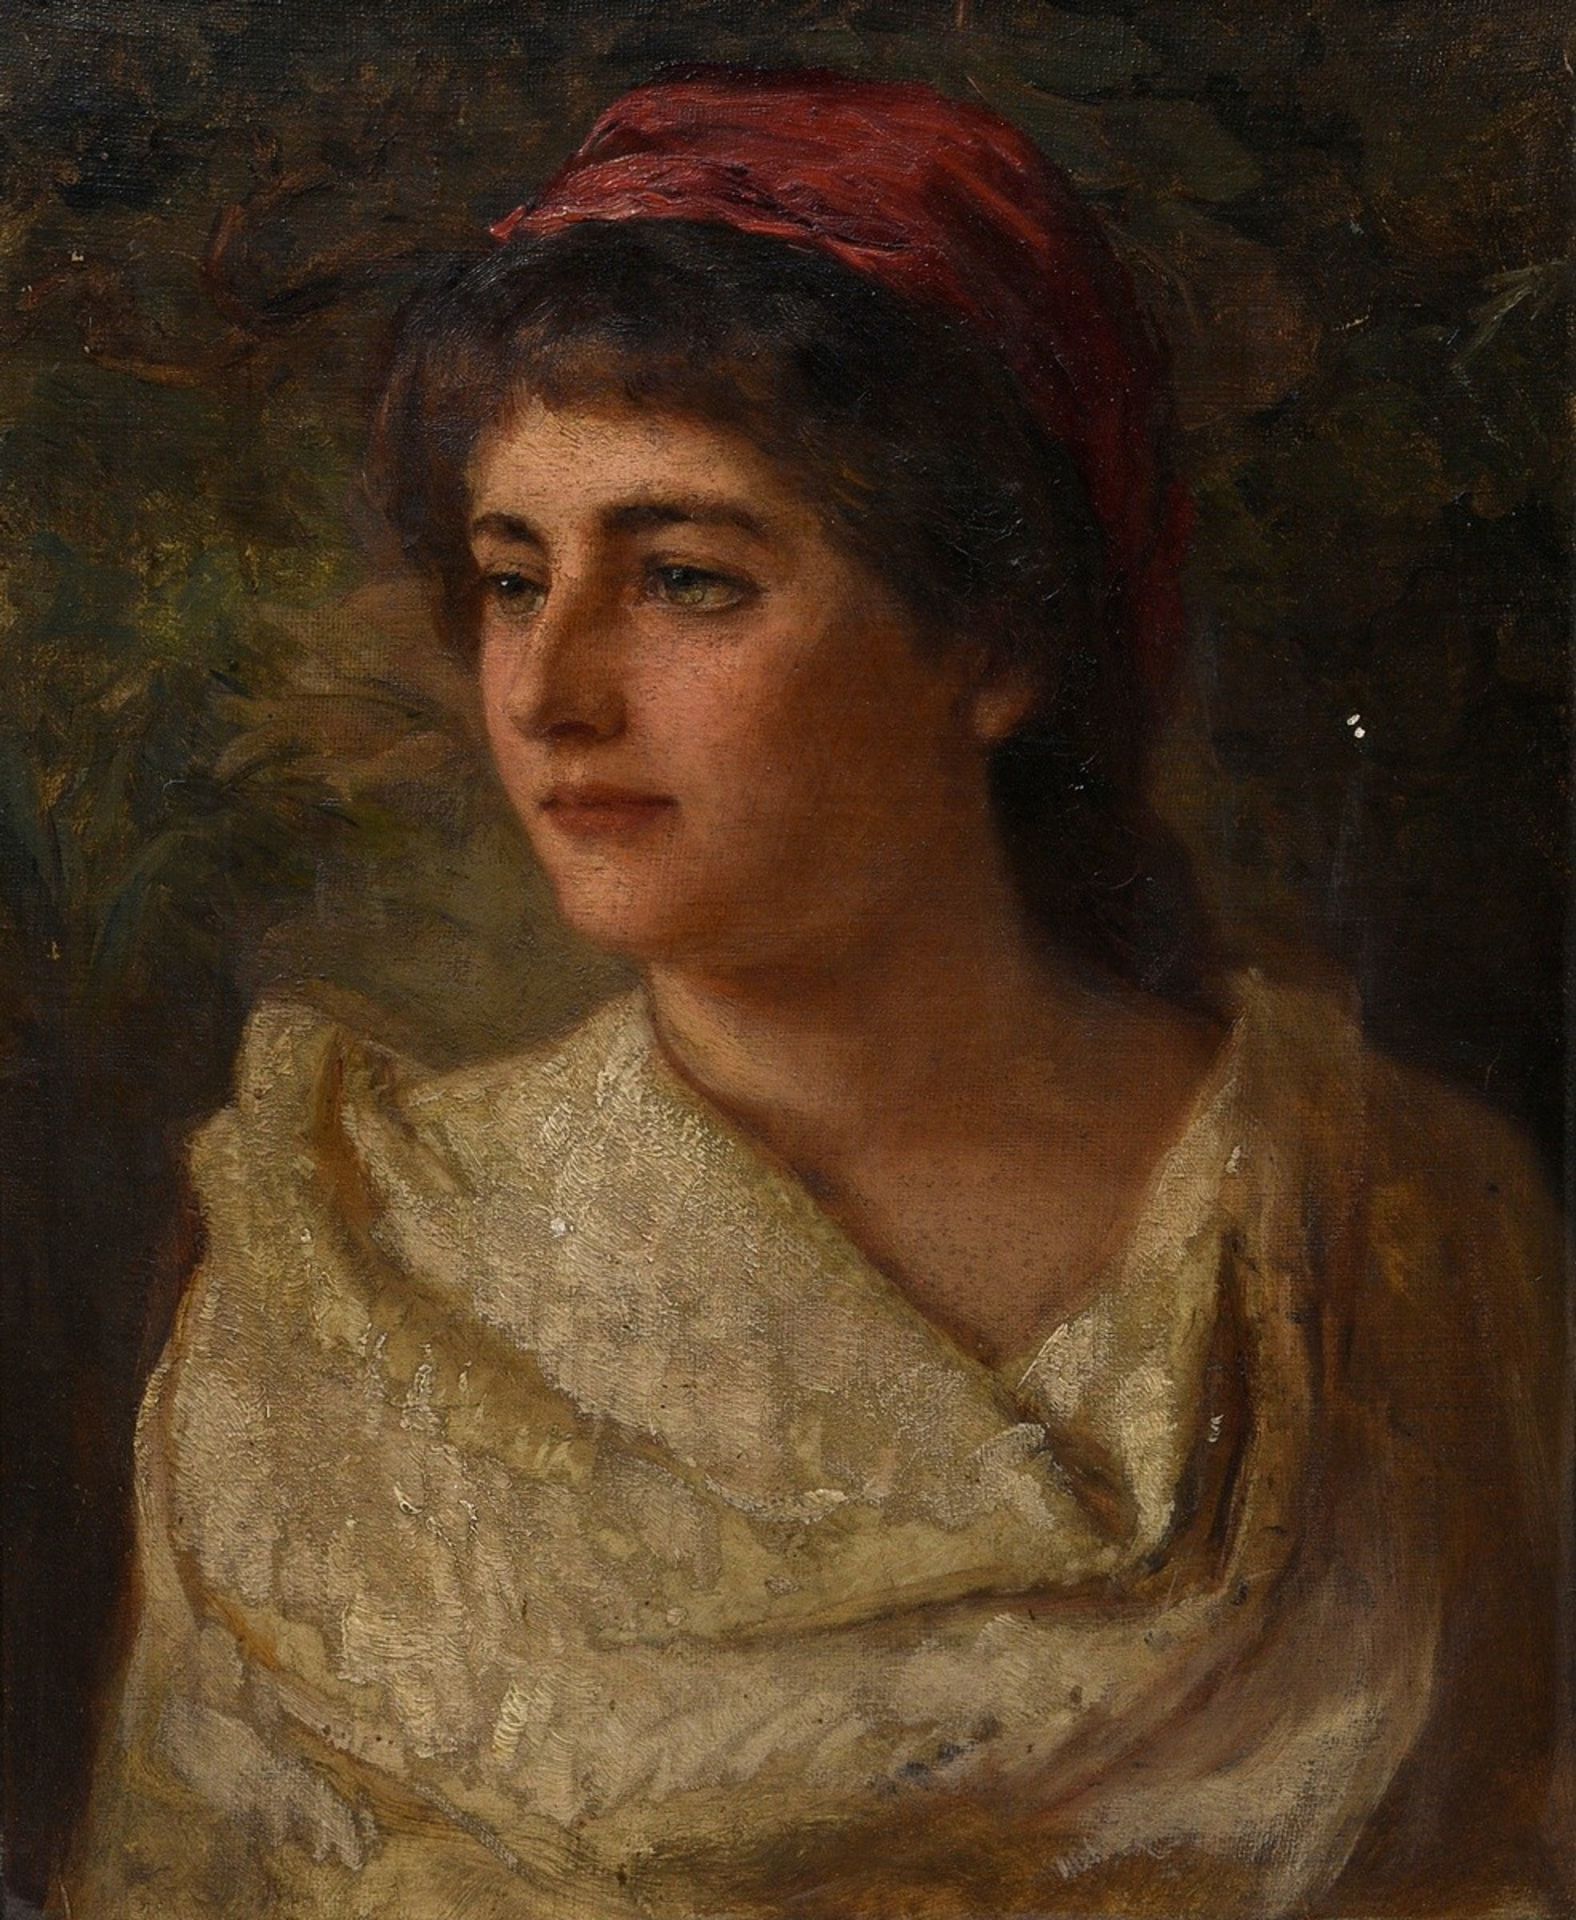 Unknown artist c. 1890 "Young woman with red headscarf", oil/canvas mounted on cardboard, magnifice